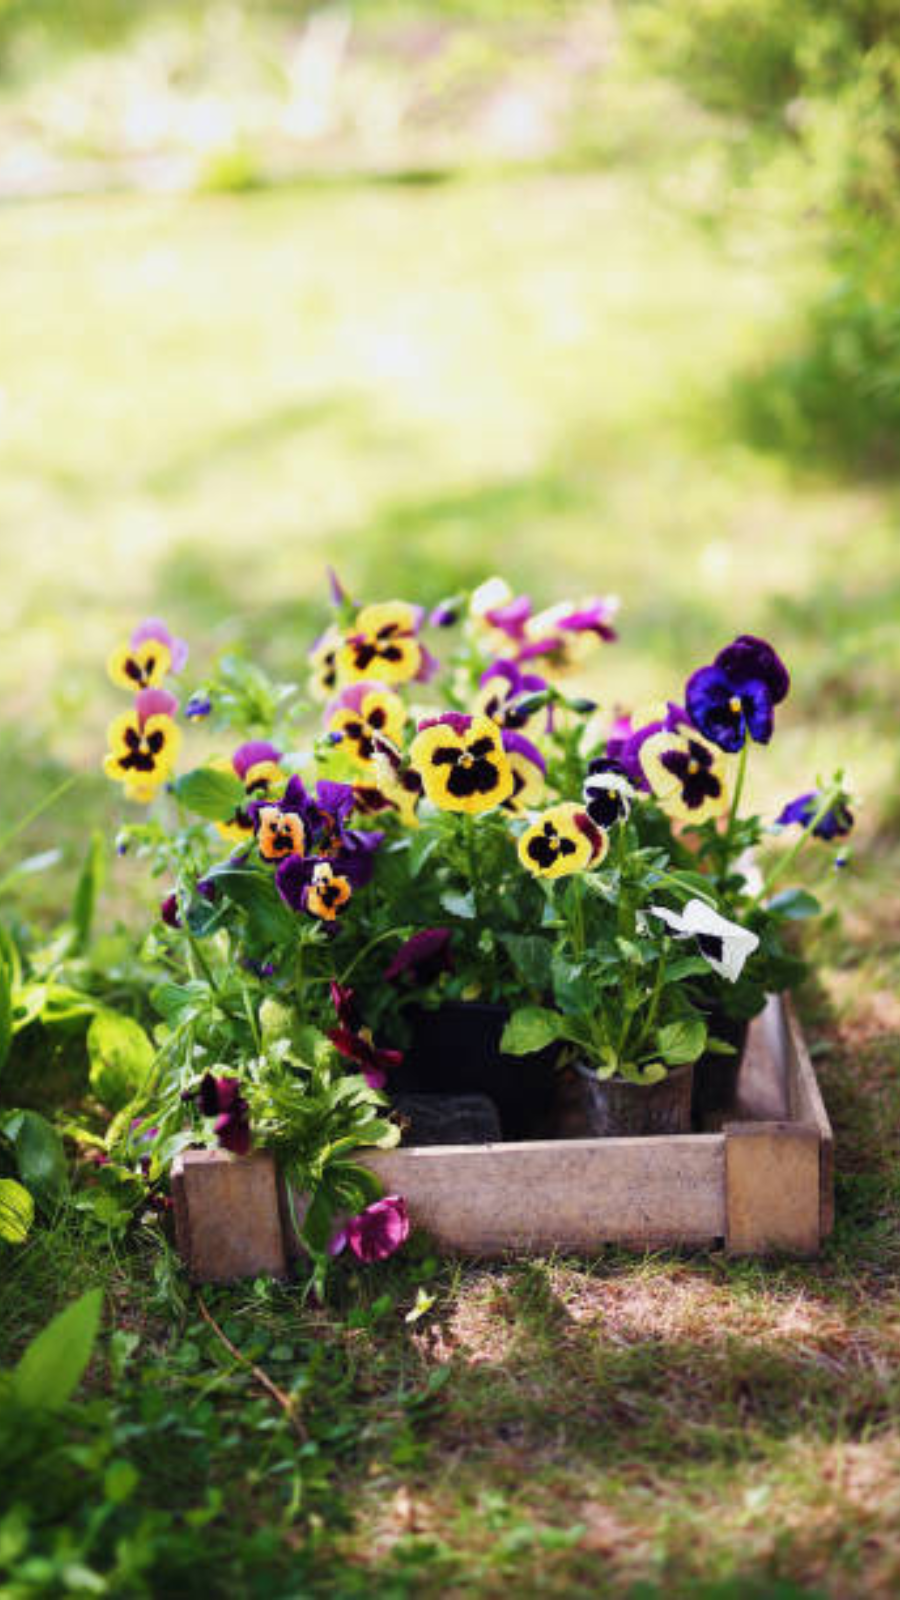 Plants best suited for summer season